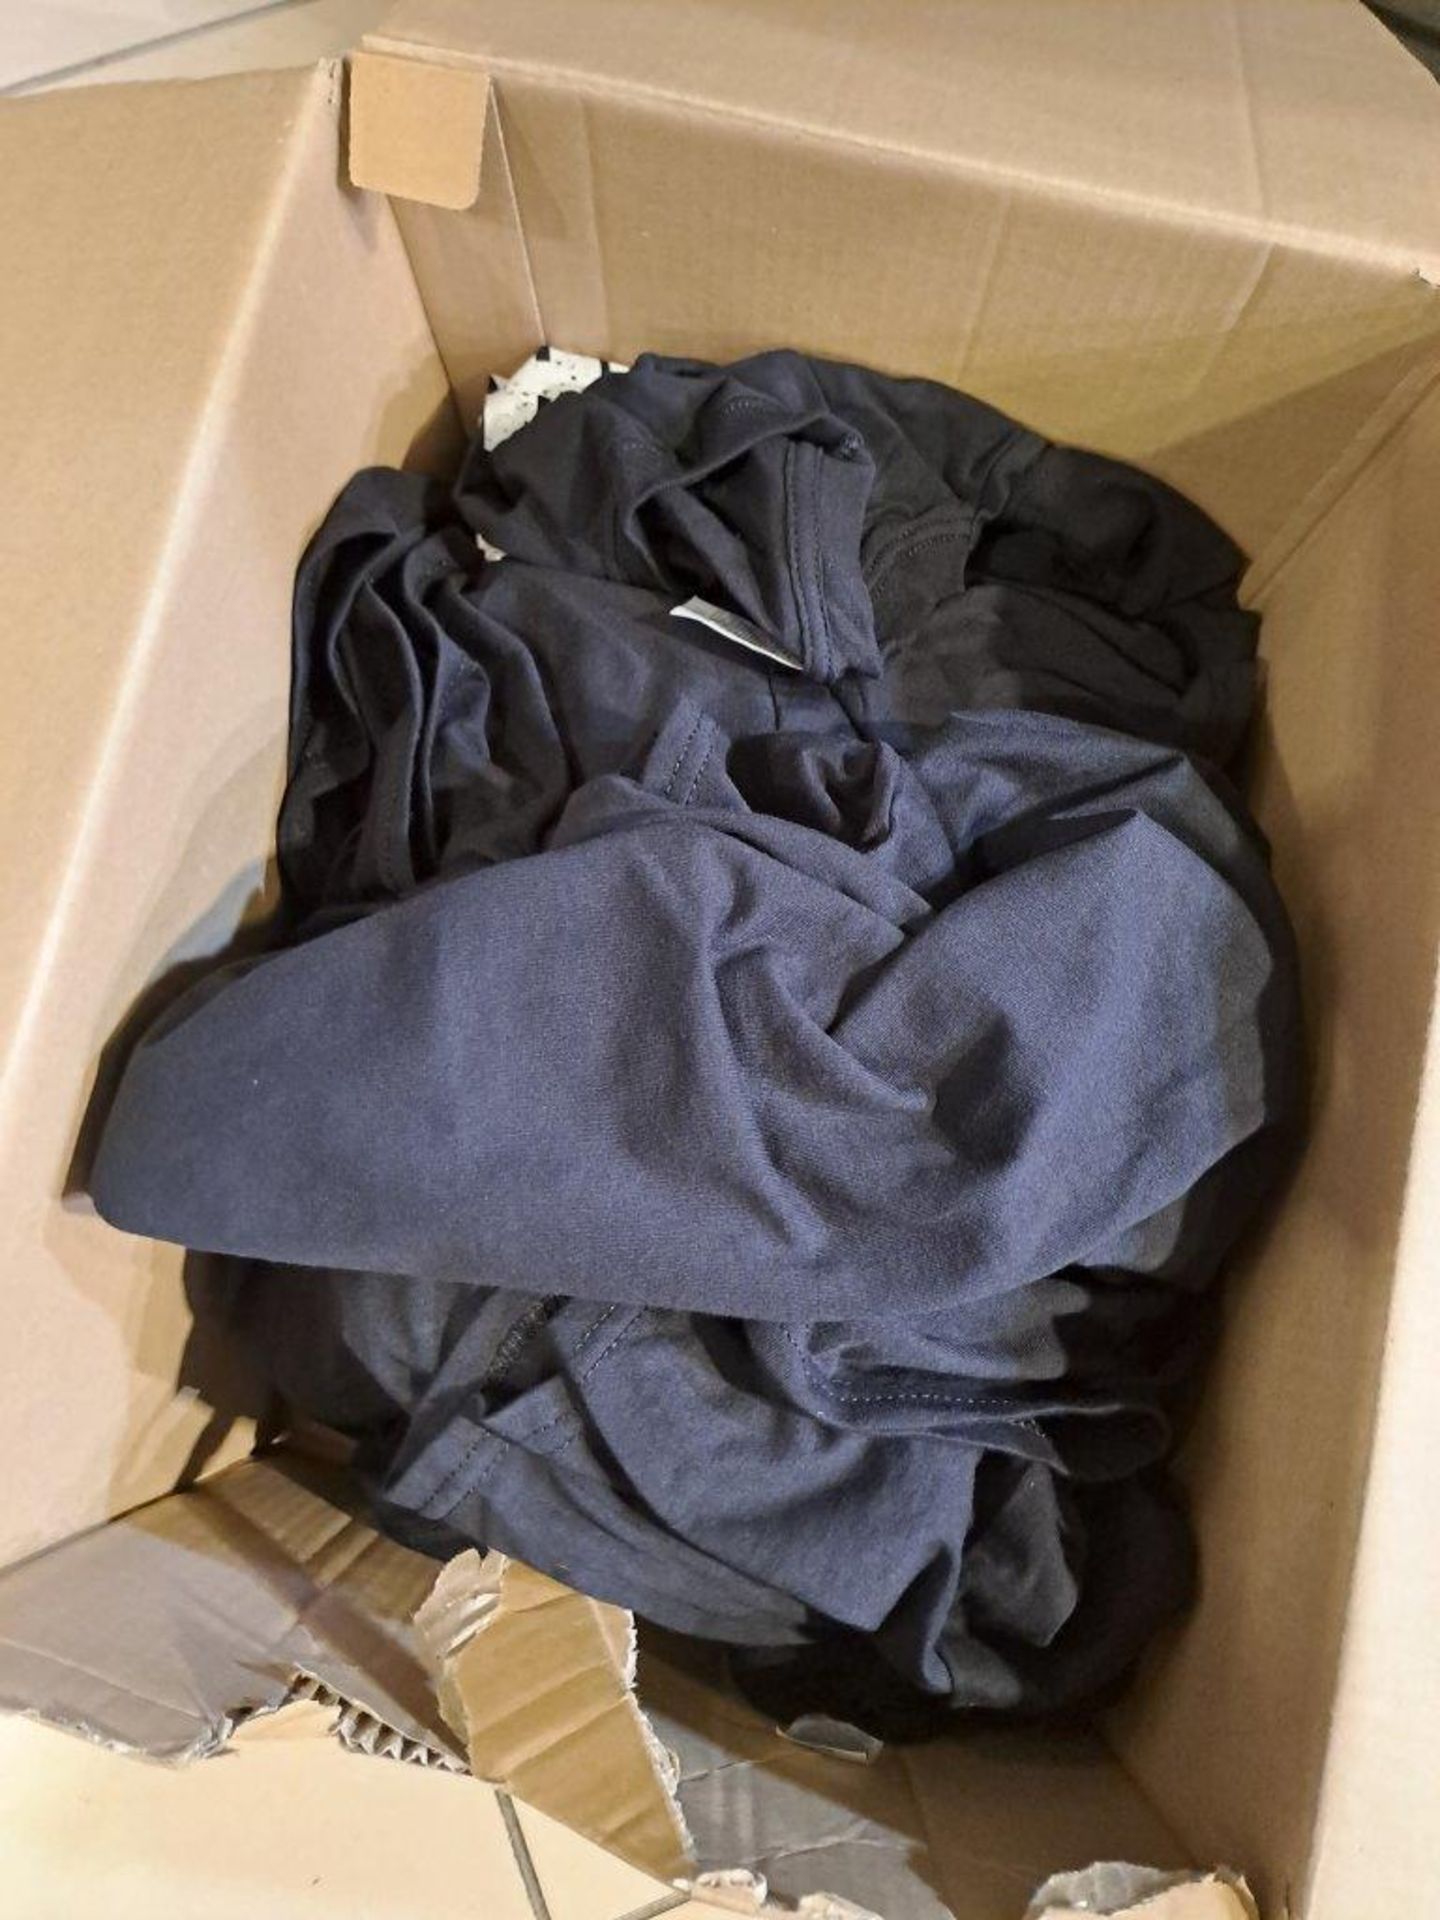 Approx. 16 x Harley Davidson t-shirts, to box - Image 3 of 5